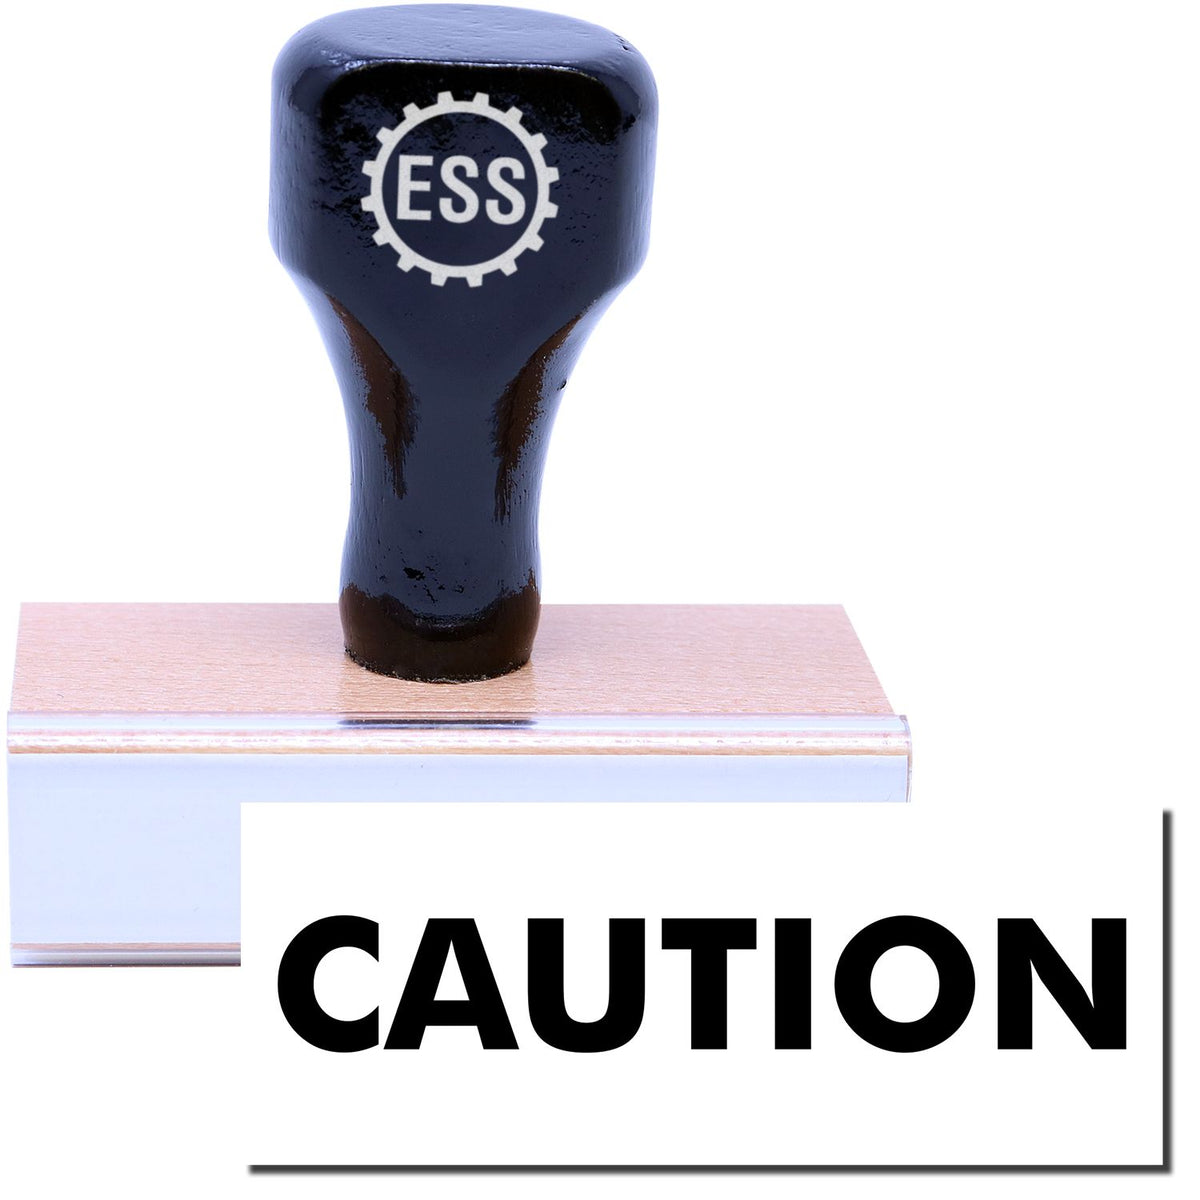 A stock office rubber stamp with a stamped image showing how the text &quot;CAUTION&quot; in a large font is displayed after stamping.